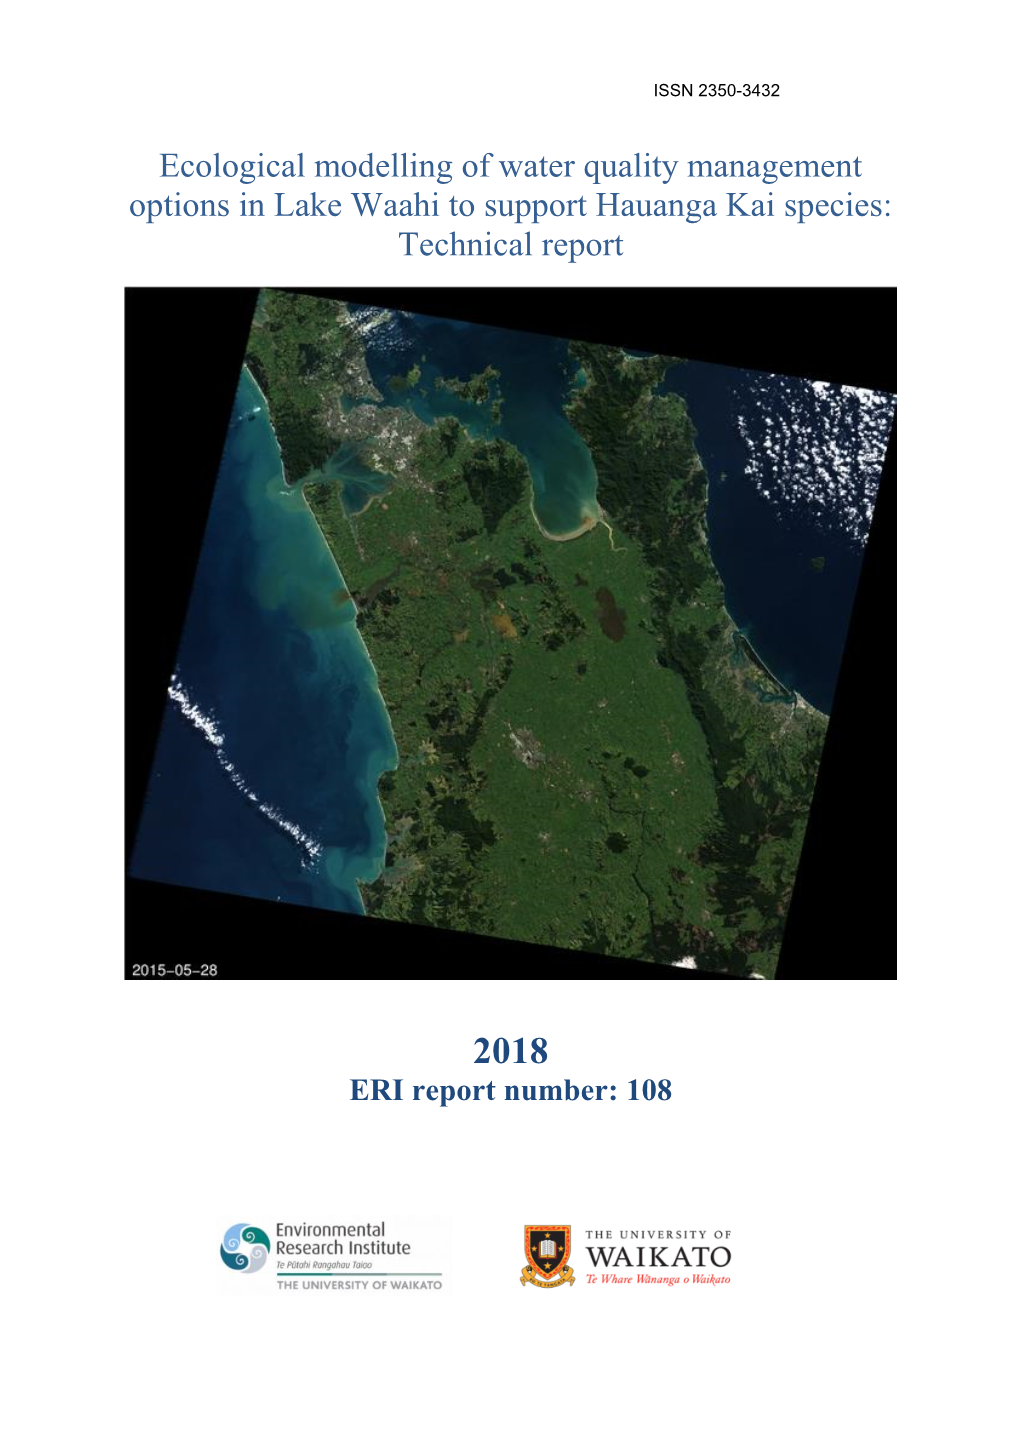 Ecological Modelling of Water Quality Management Options in Lake Waahi to Support Hauanga Kai Species: Technical Report